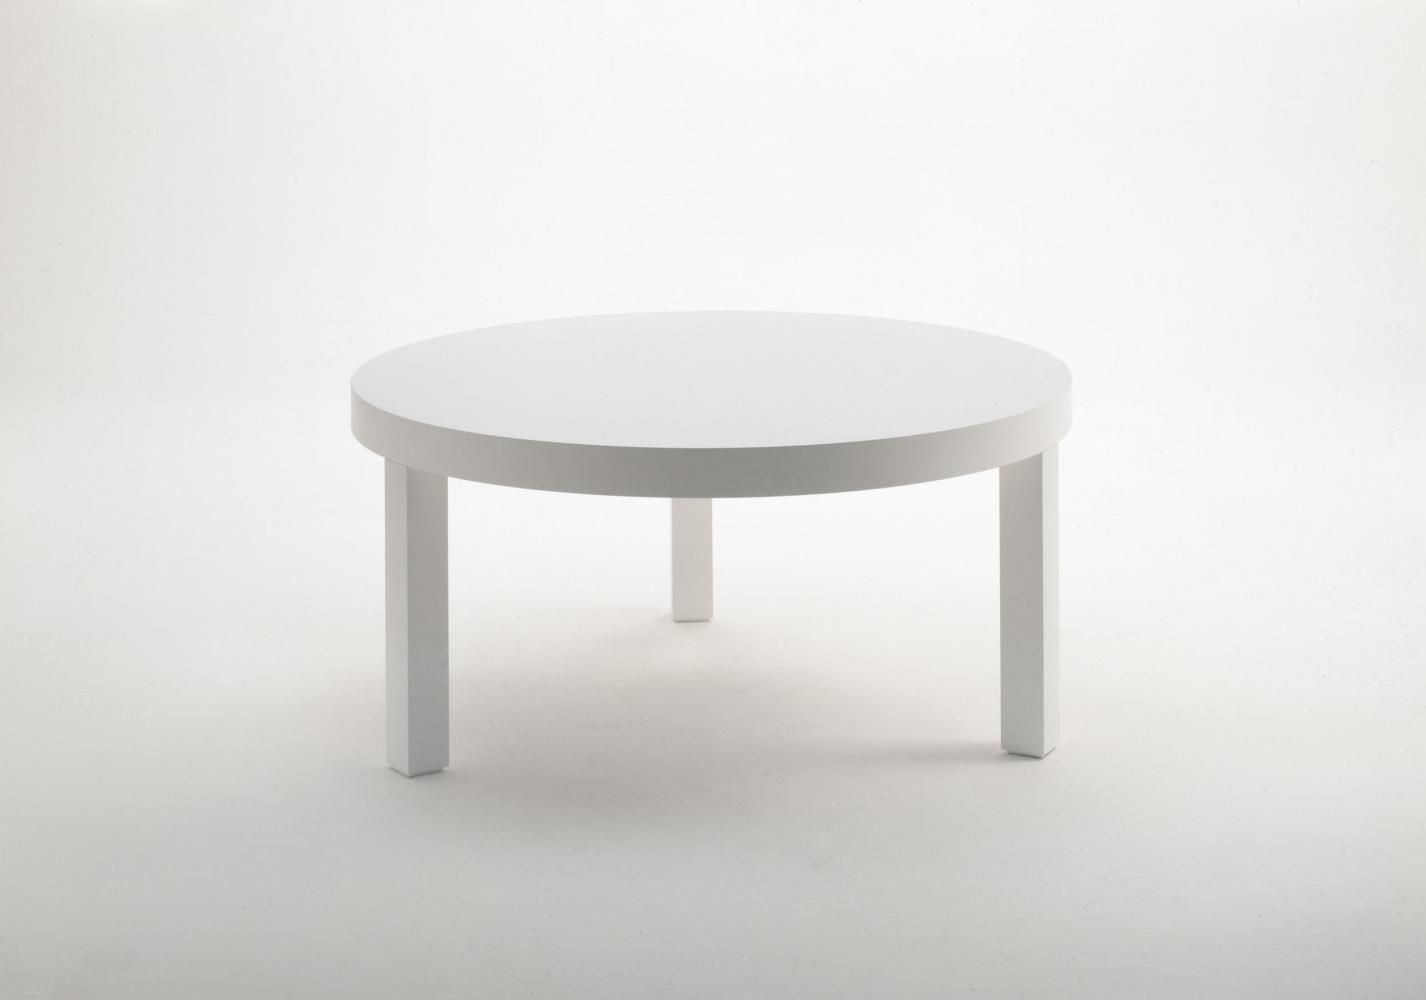 Custom made rectangular, square or round modern table in wood